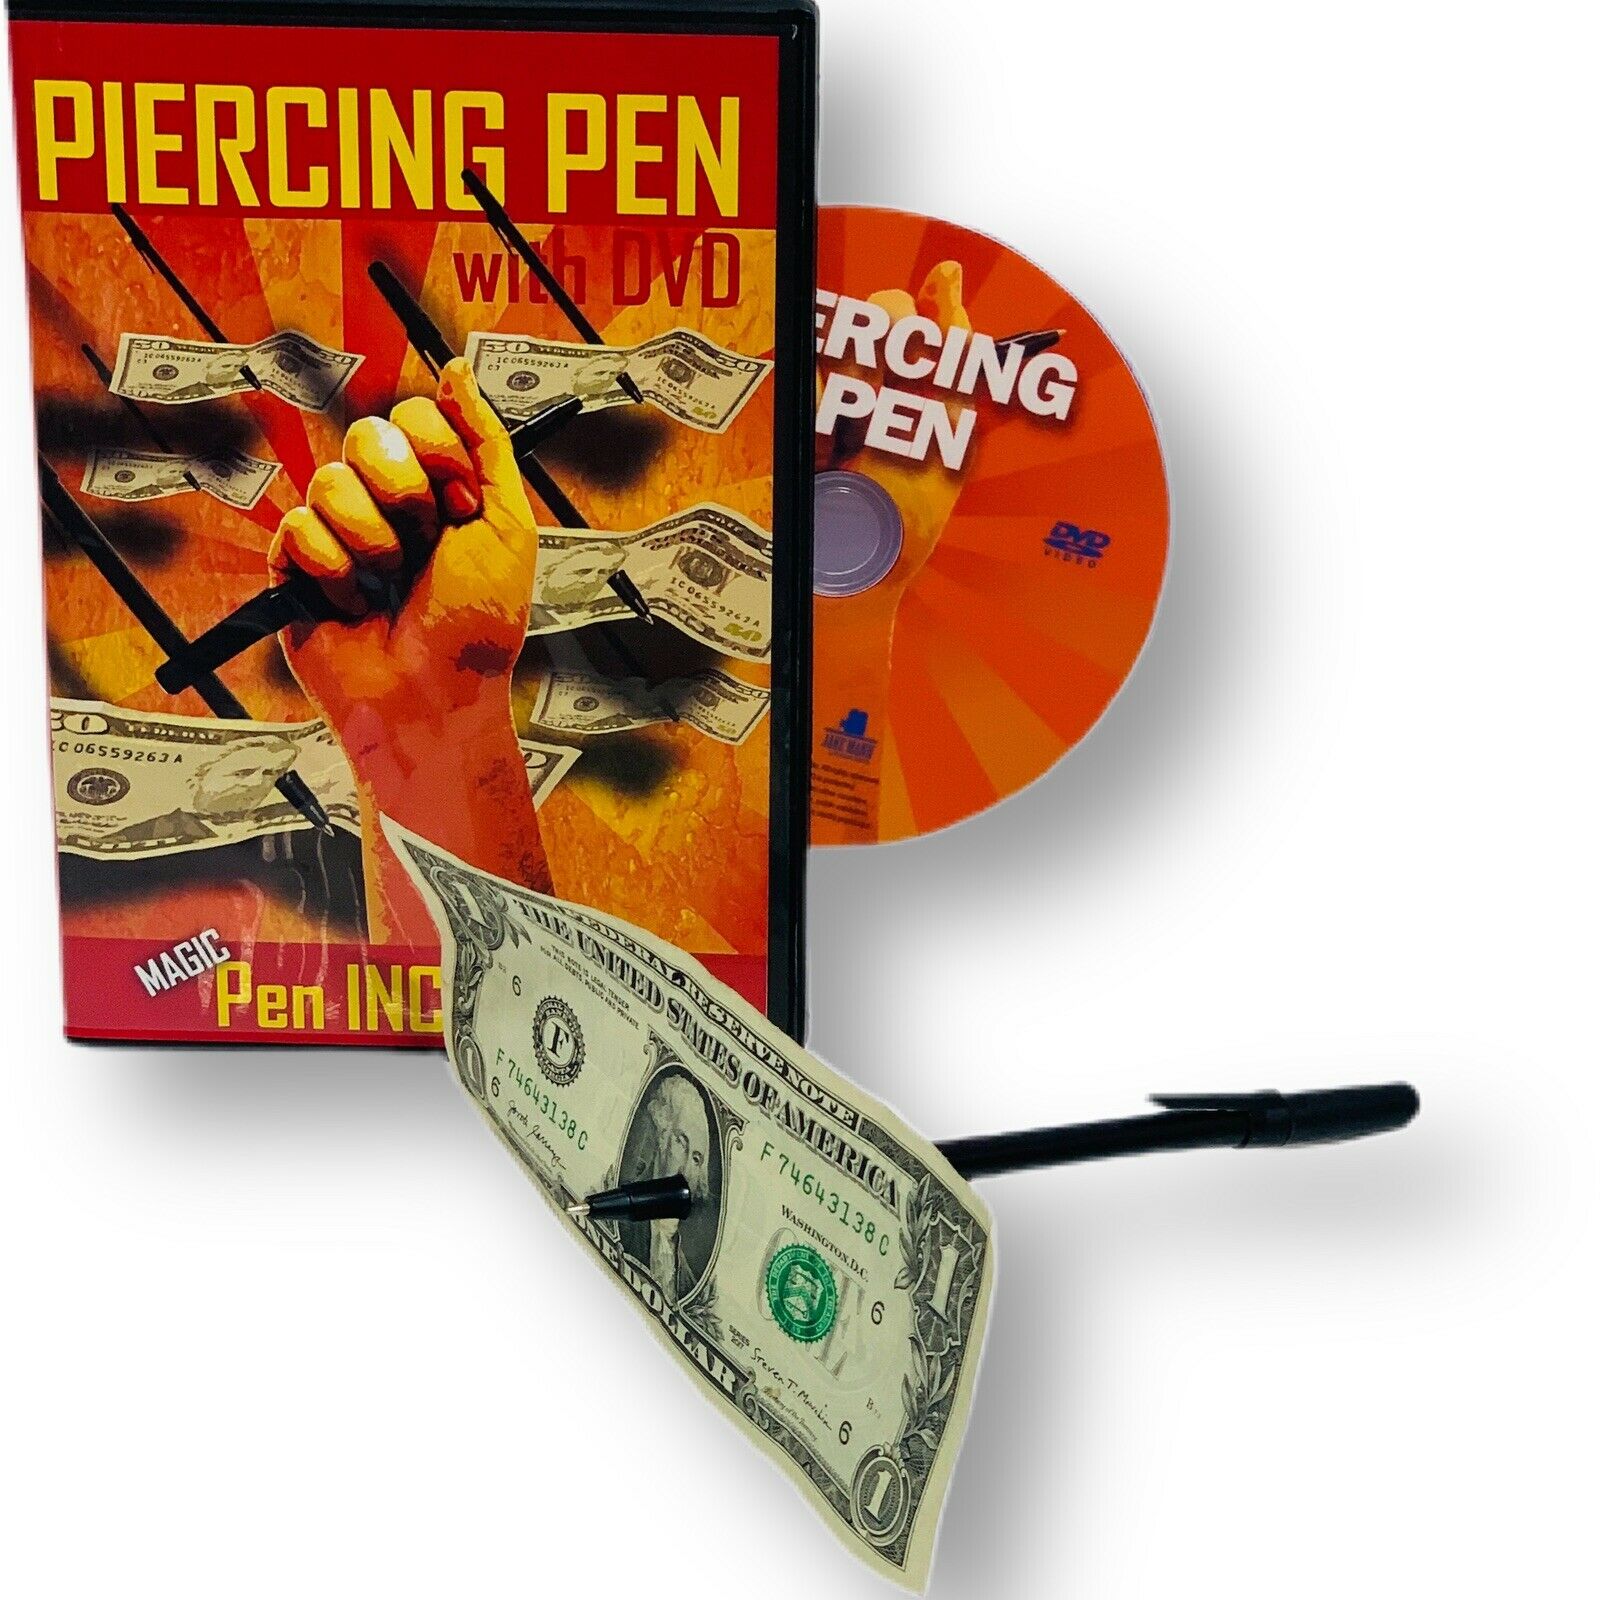 Piercing Pen DVD and gimmick